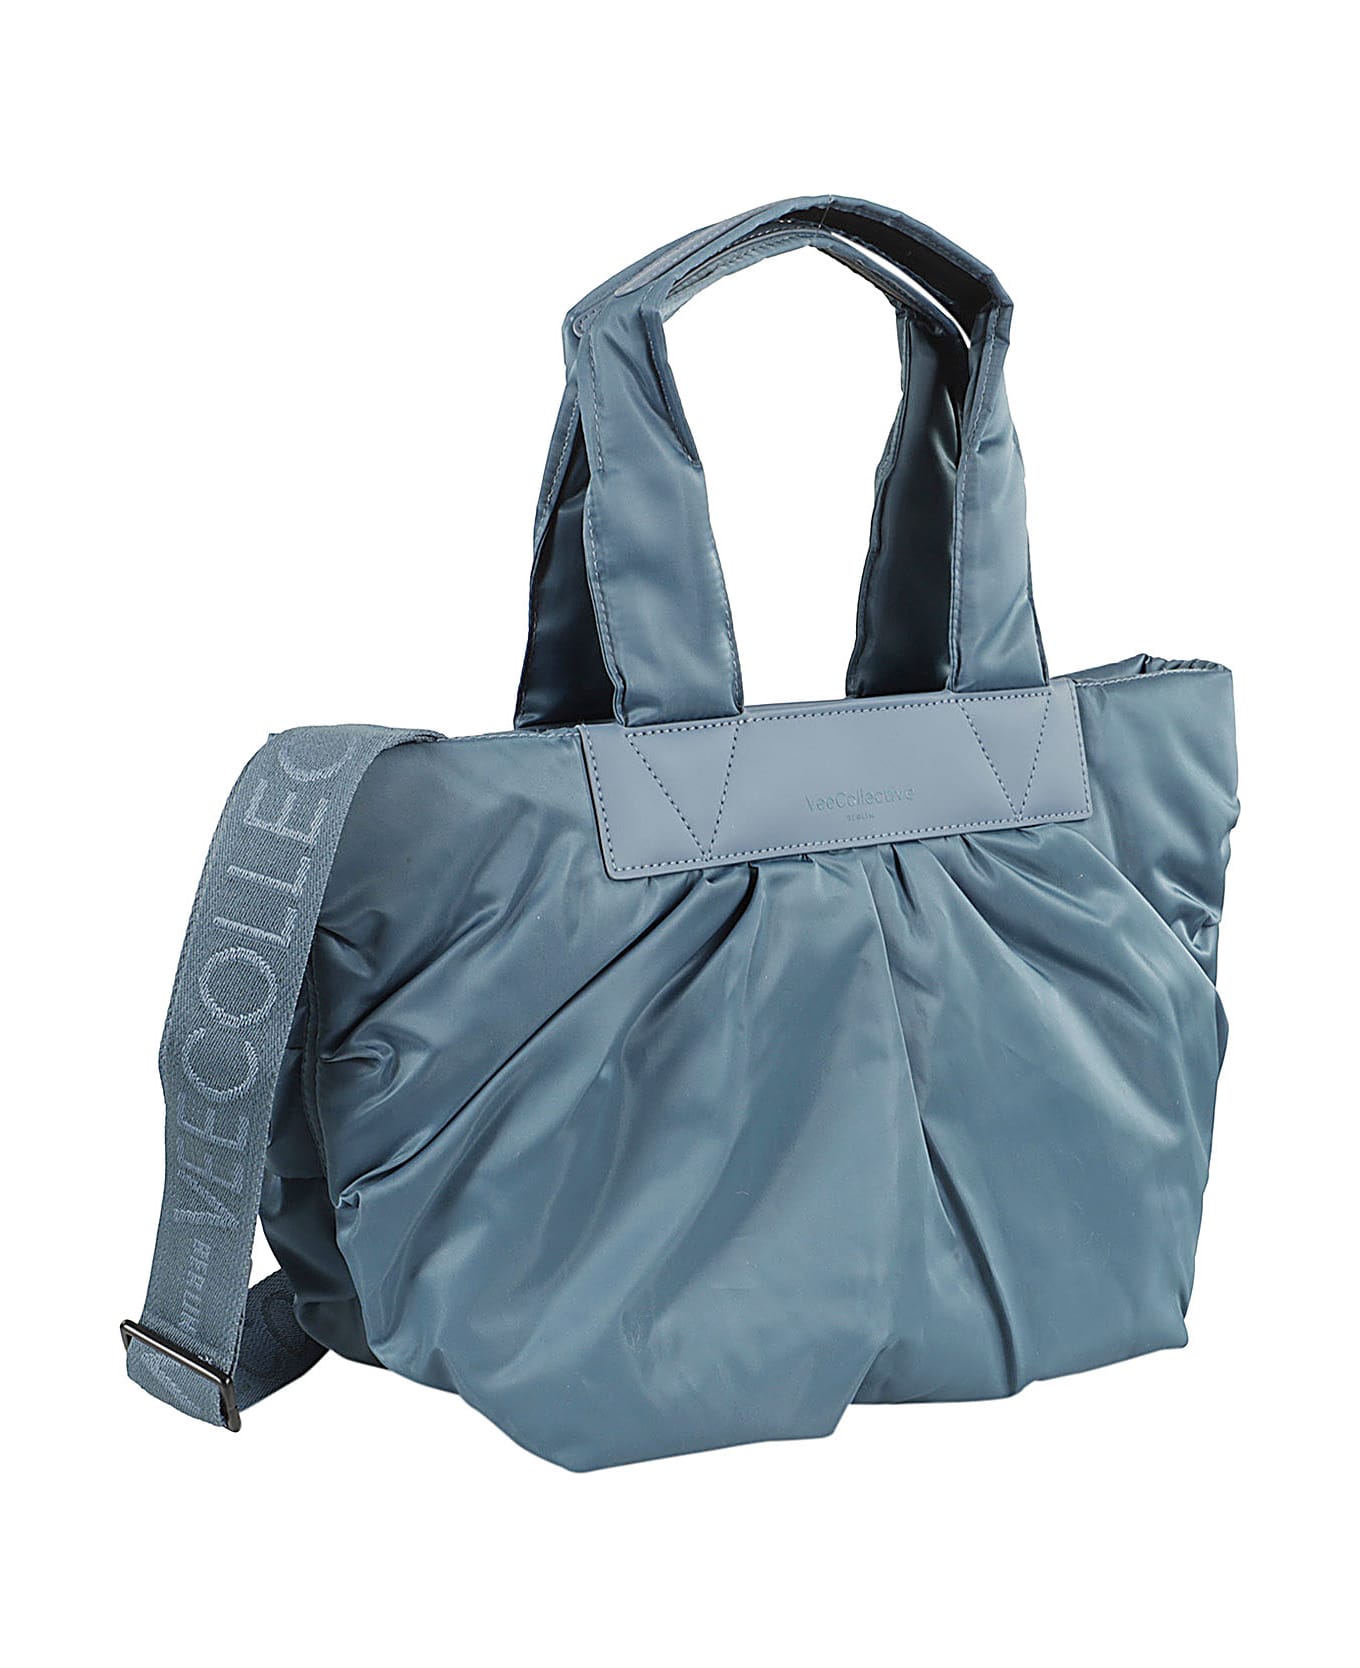 VeeCollective Caba Tote Small - Bluefin Bluef トートバッグ